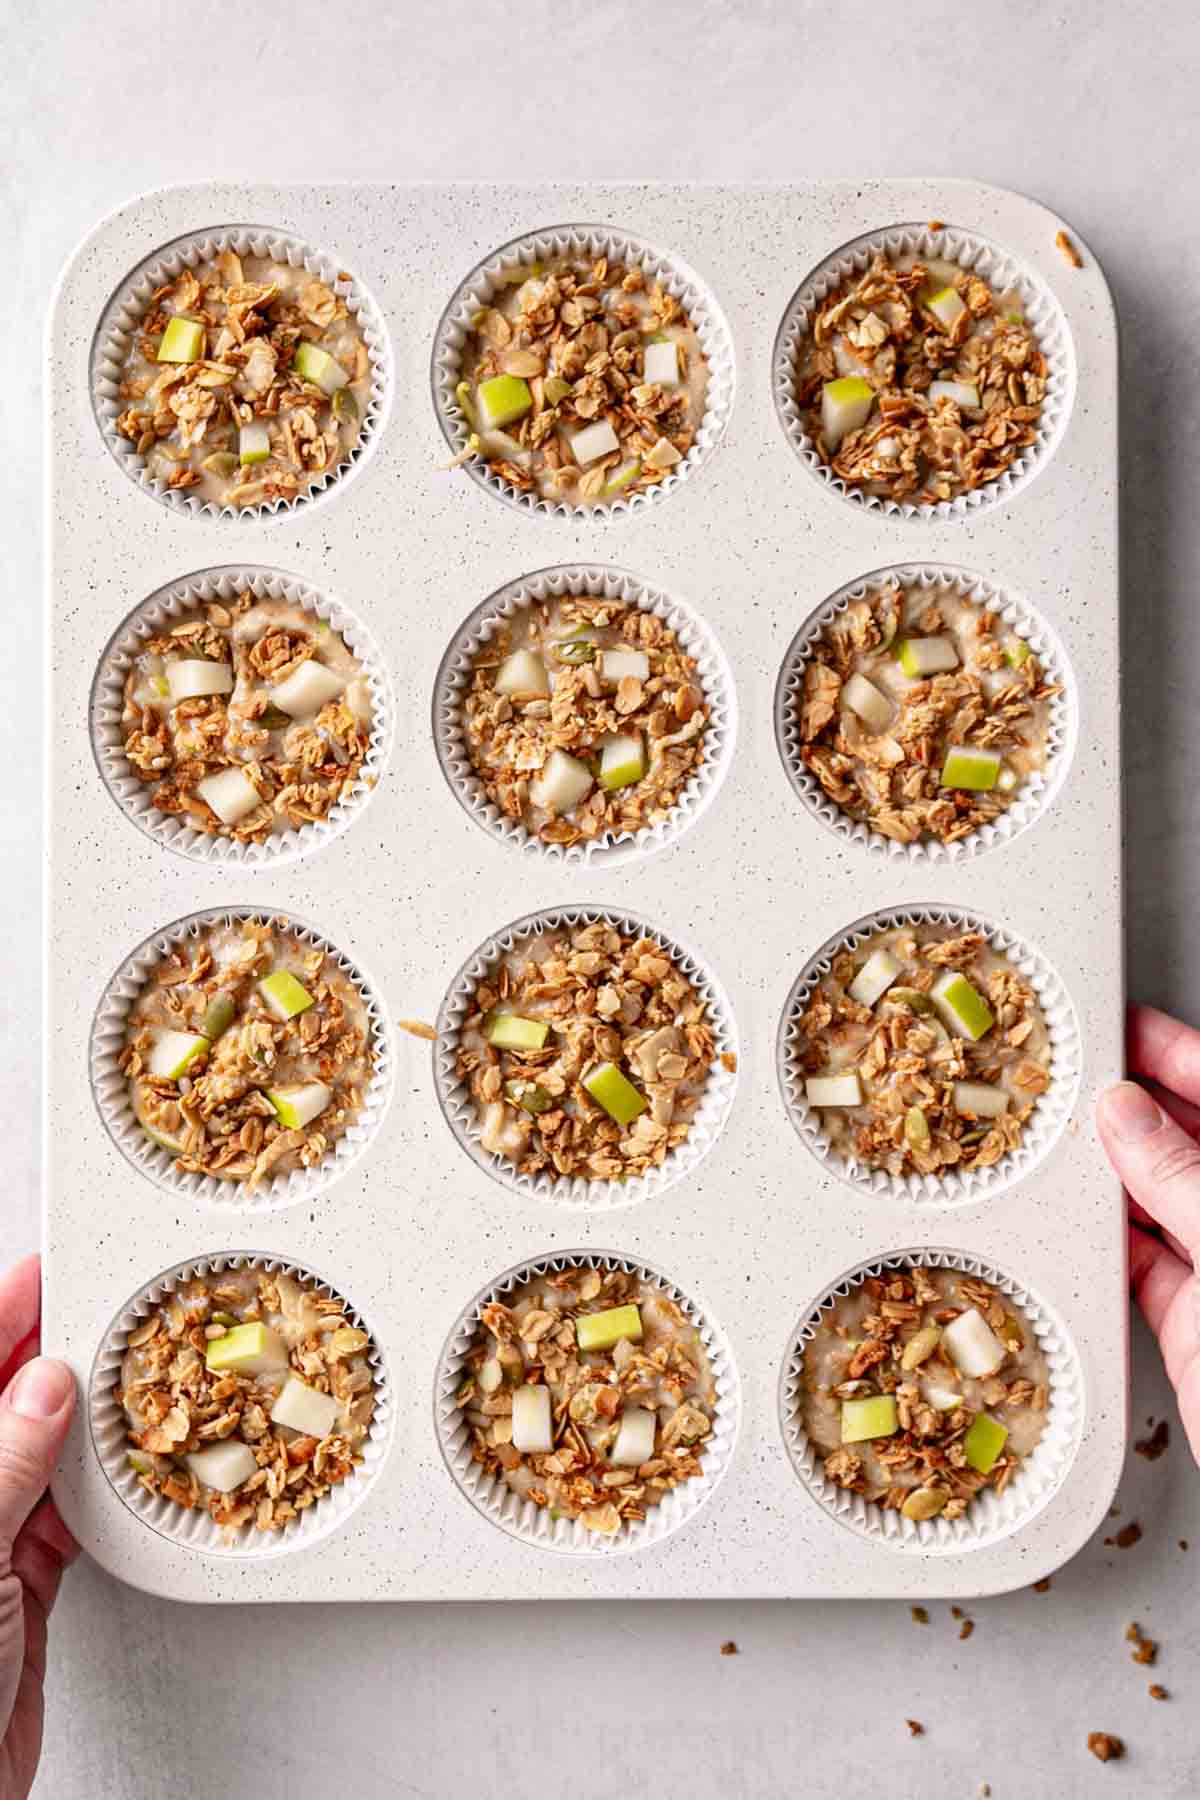 Muffin batter in white muffin tin, granola and diced apples pressed on top of batter.